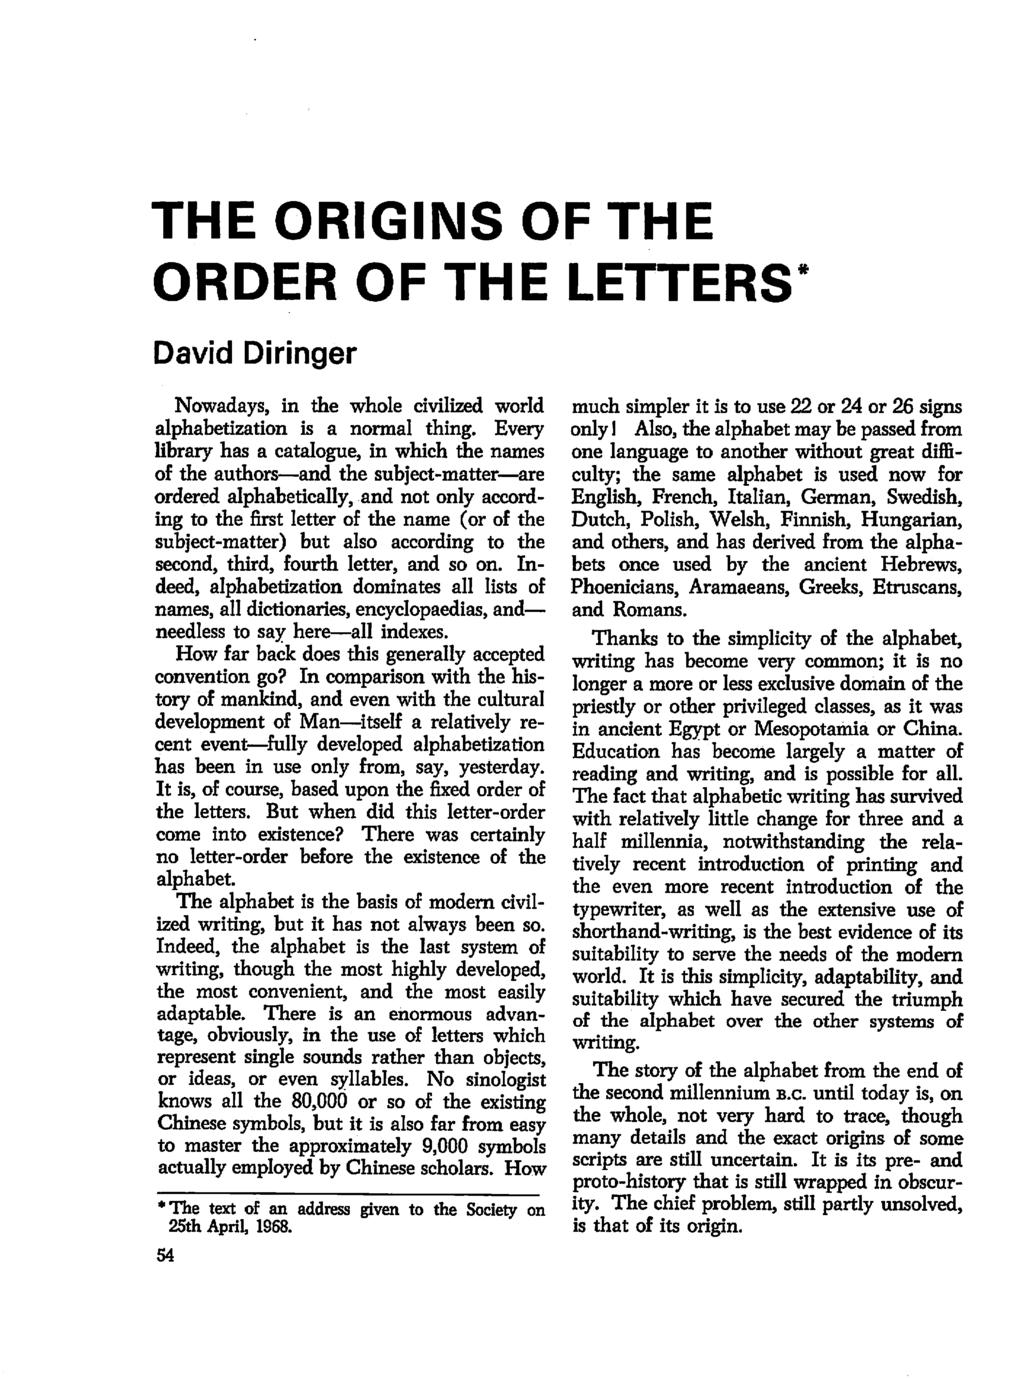 THE ORIGINS OF THE ORDER OF THE LETTERS David Diringer Nowadays, in the whole civilized world alphabetization is a normal thing.